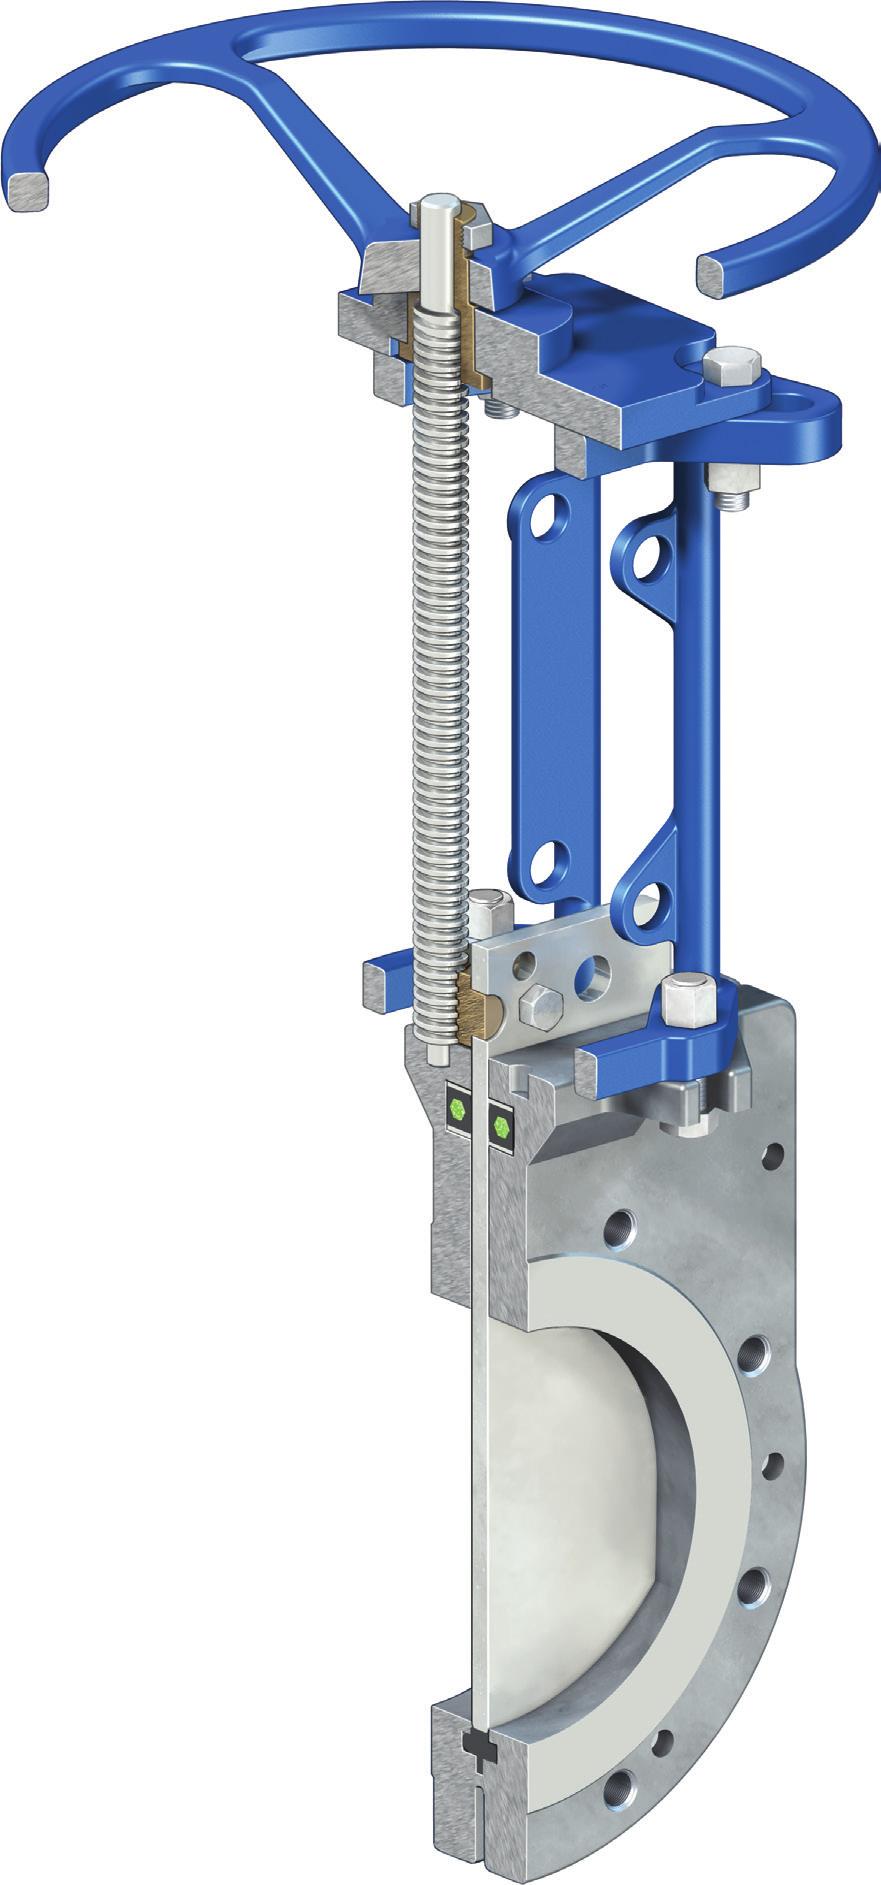 XS150 XS150 High Performance Knife Gate Valve The Fabri-Valve XS150 High Performance Knife Gate valve features a robust perimeter seal that provides bi-directional bubble tight shutoff.